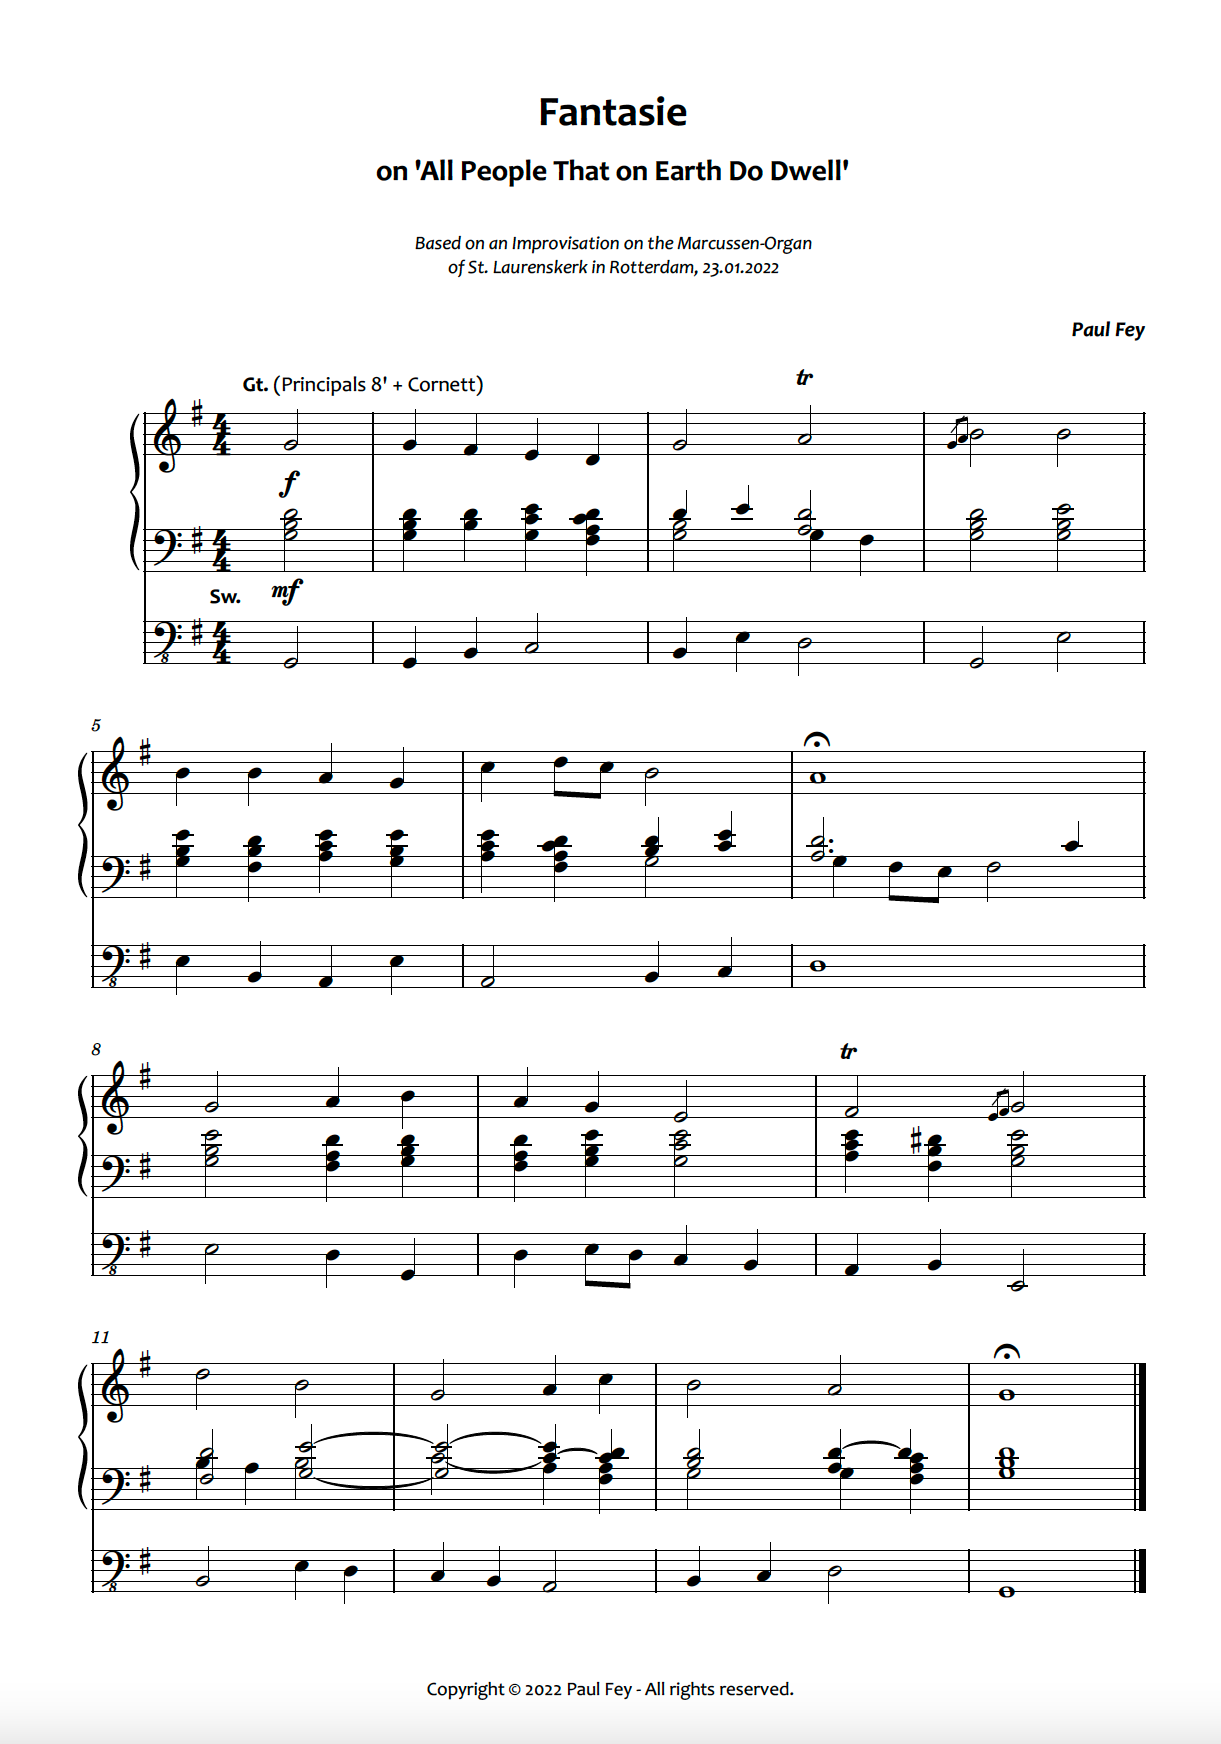 Fantasie on "All People that on Earth Do Dwell" (Sheet Music) - Music for Organ